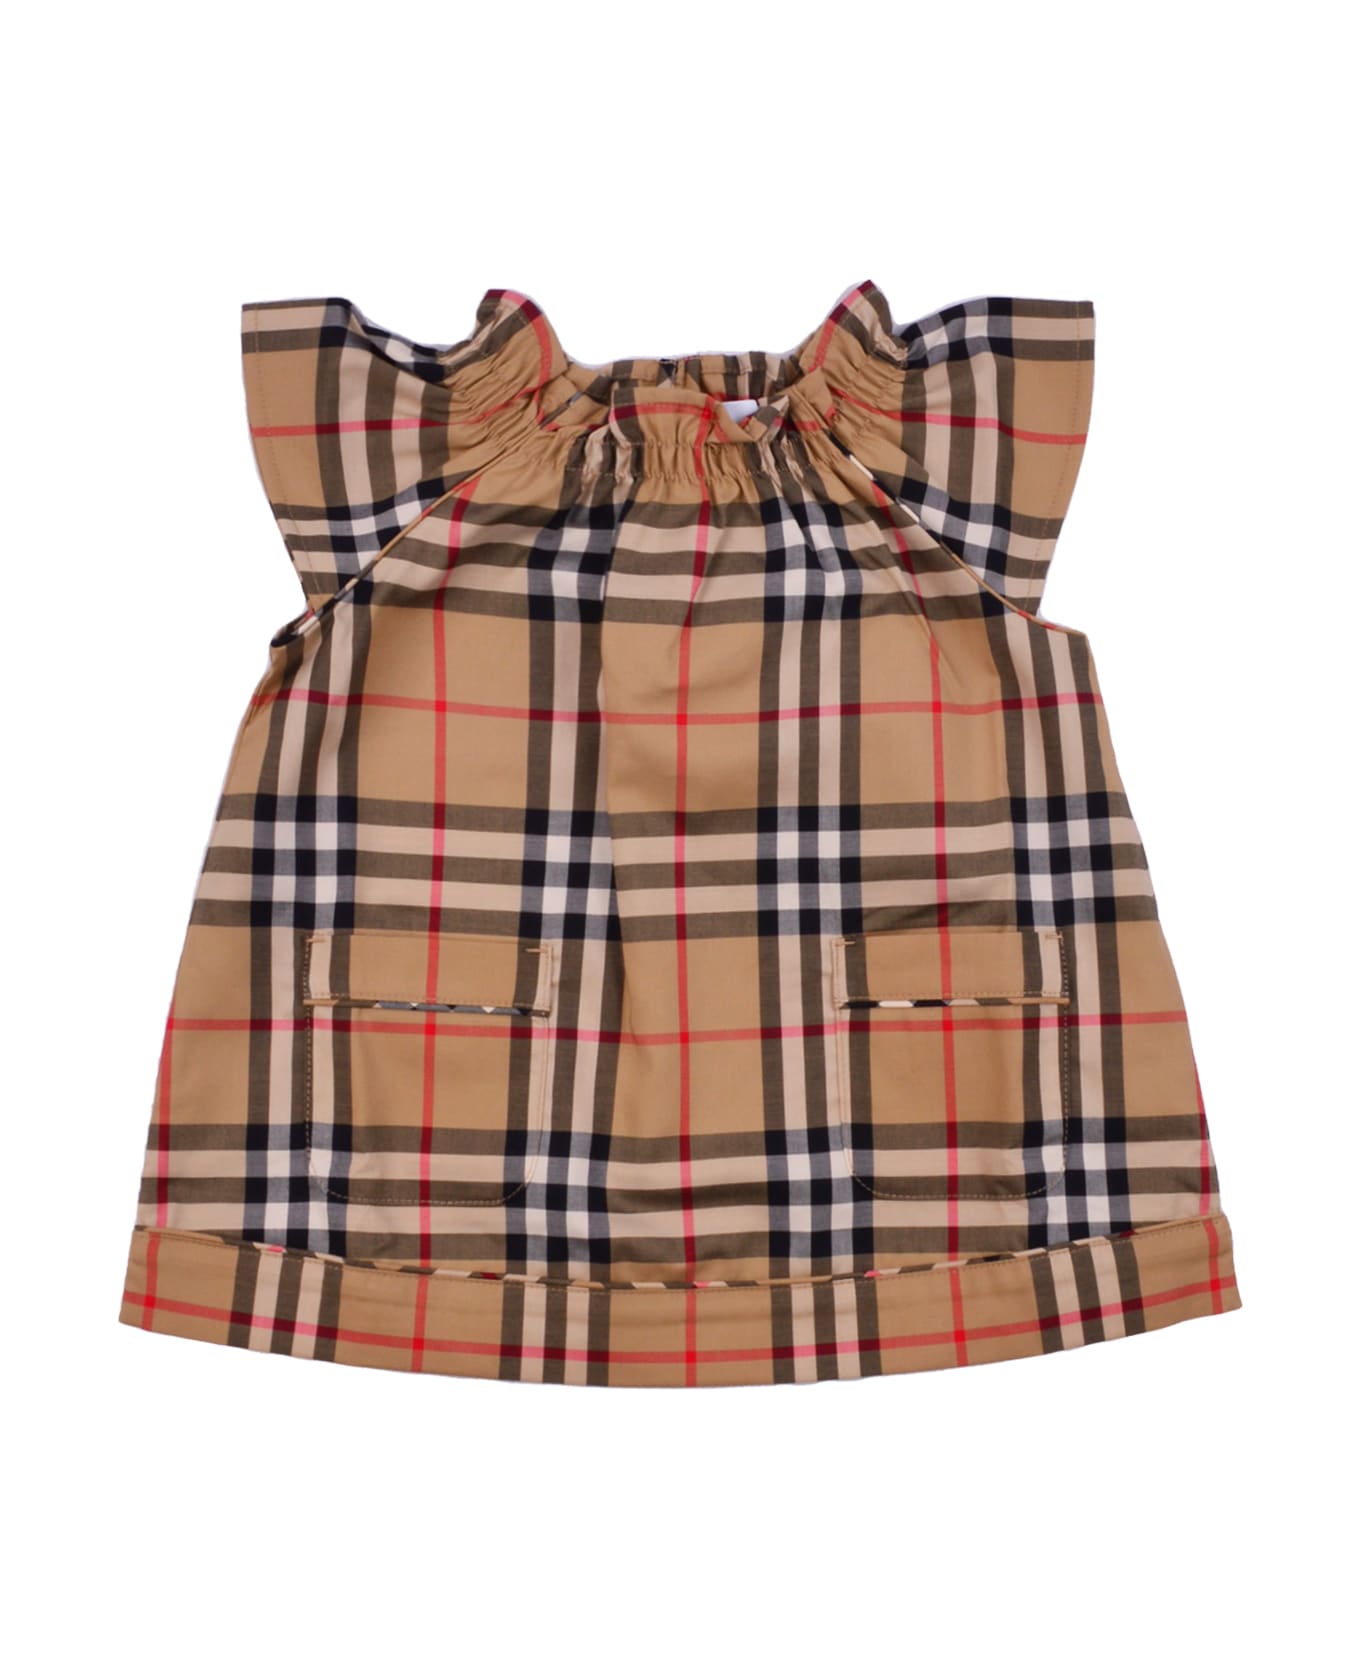 Burberry Dress With Vintage Check Pattern - Beige